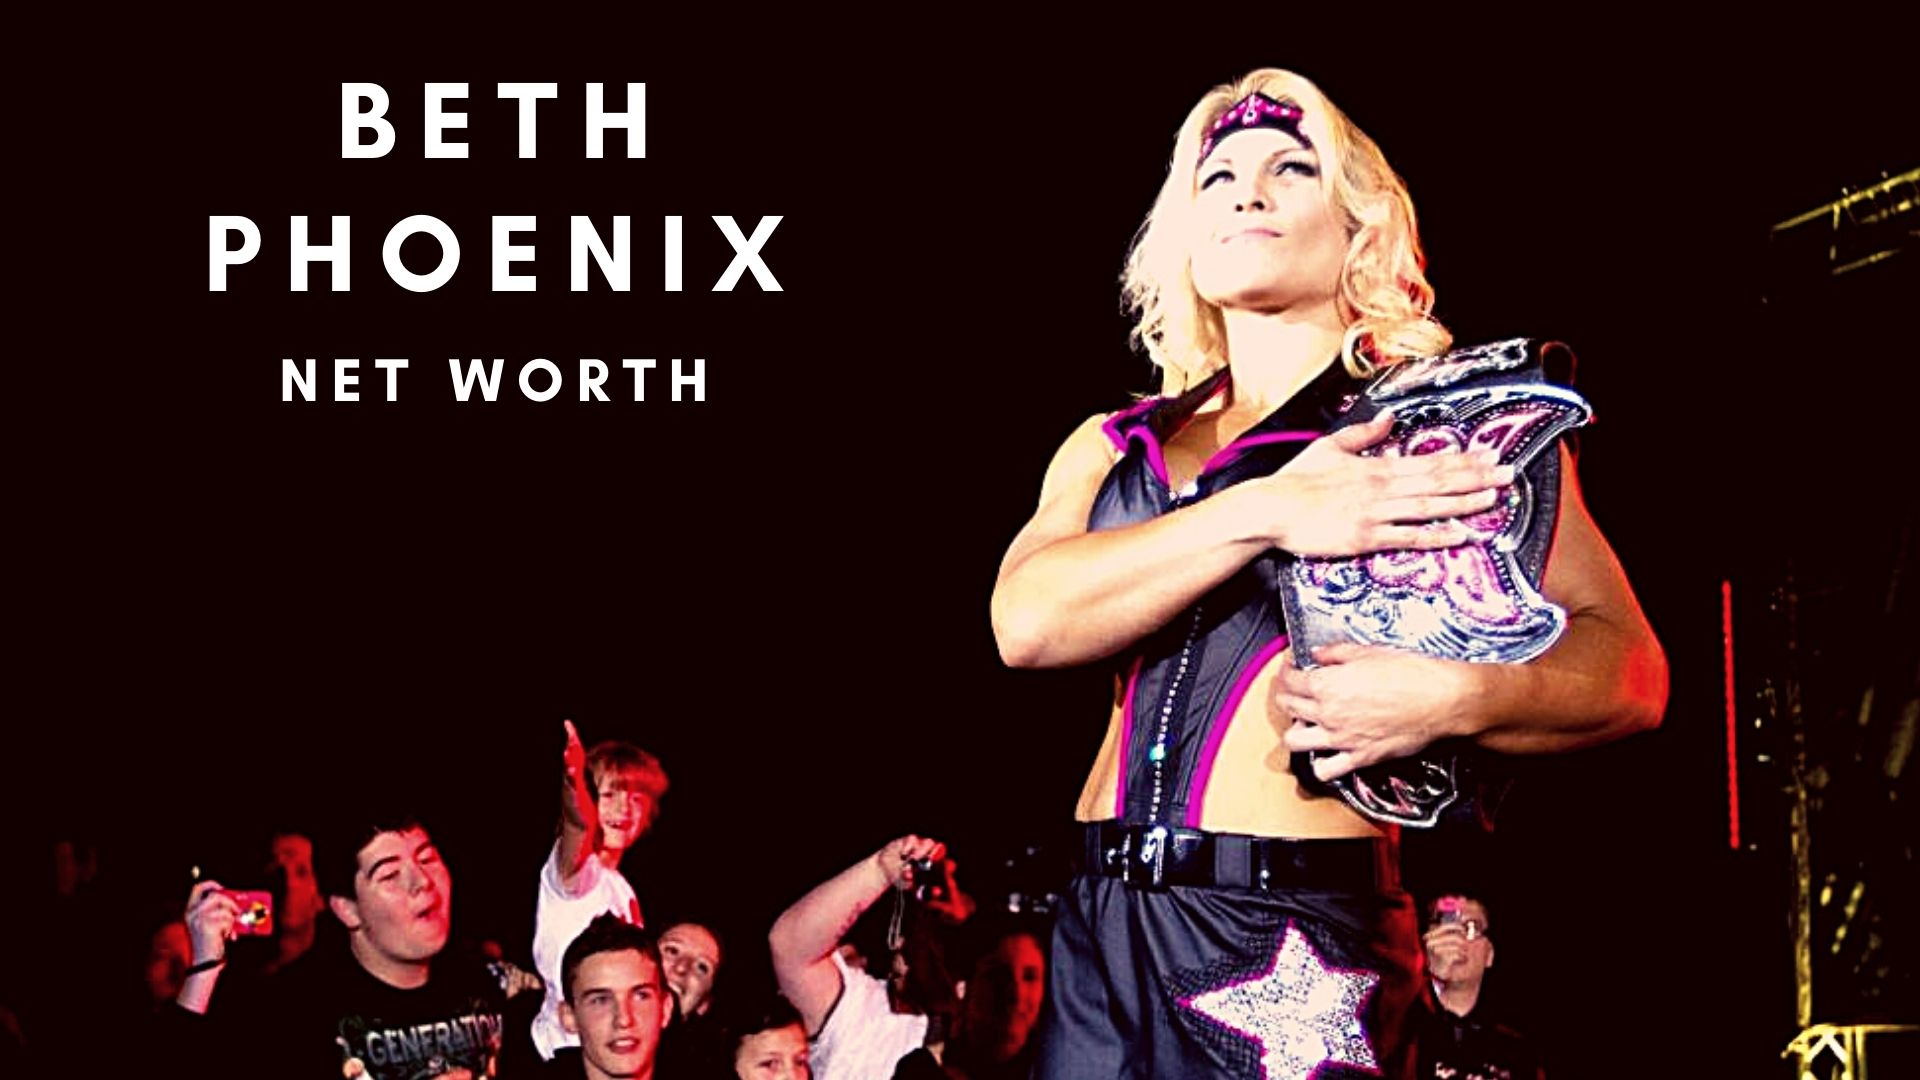 Beth Phoenix is also the wife of WWE star Edge